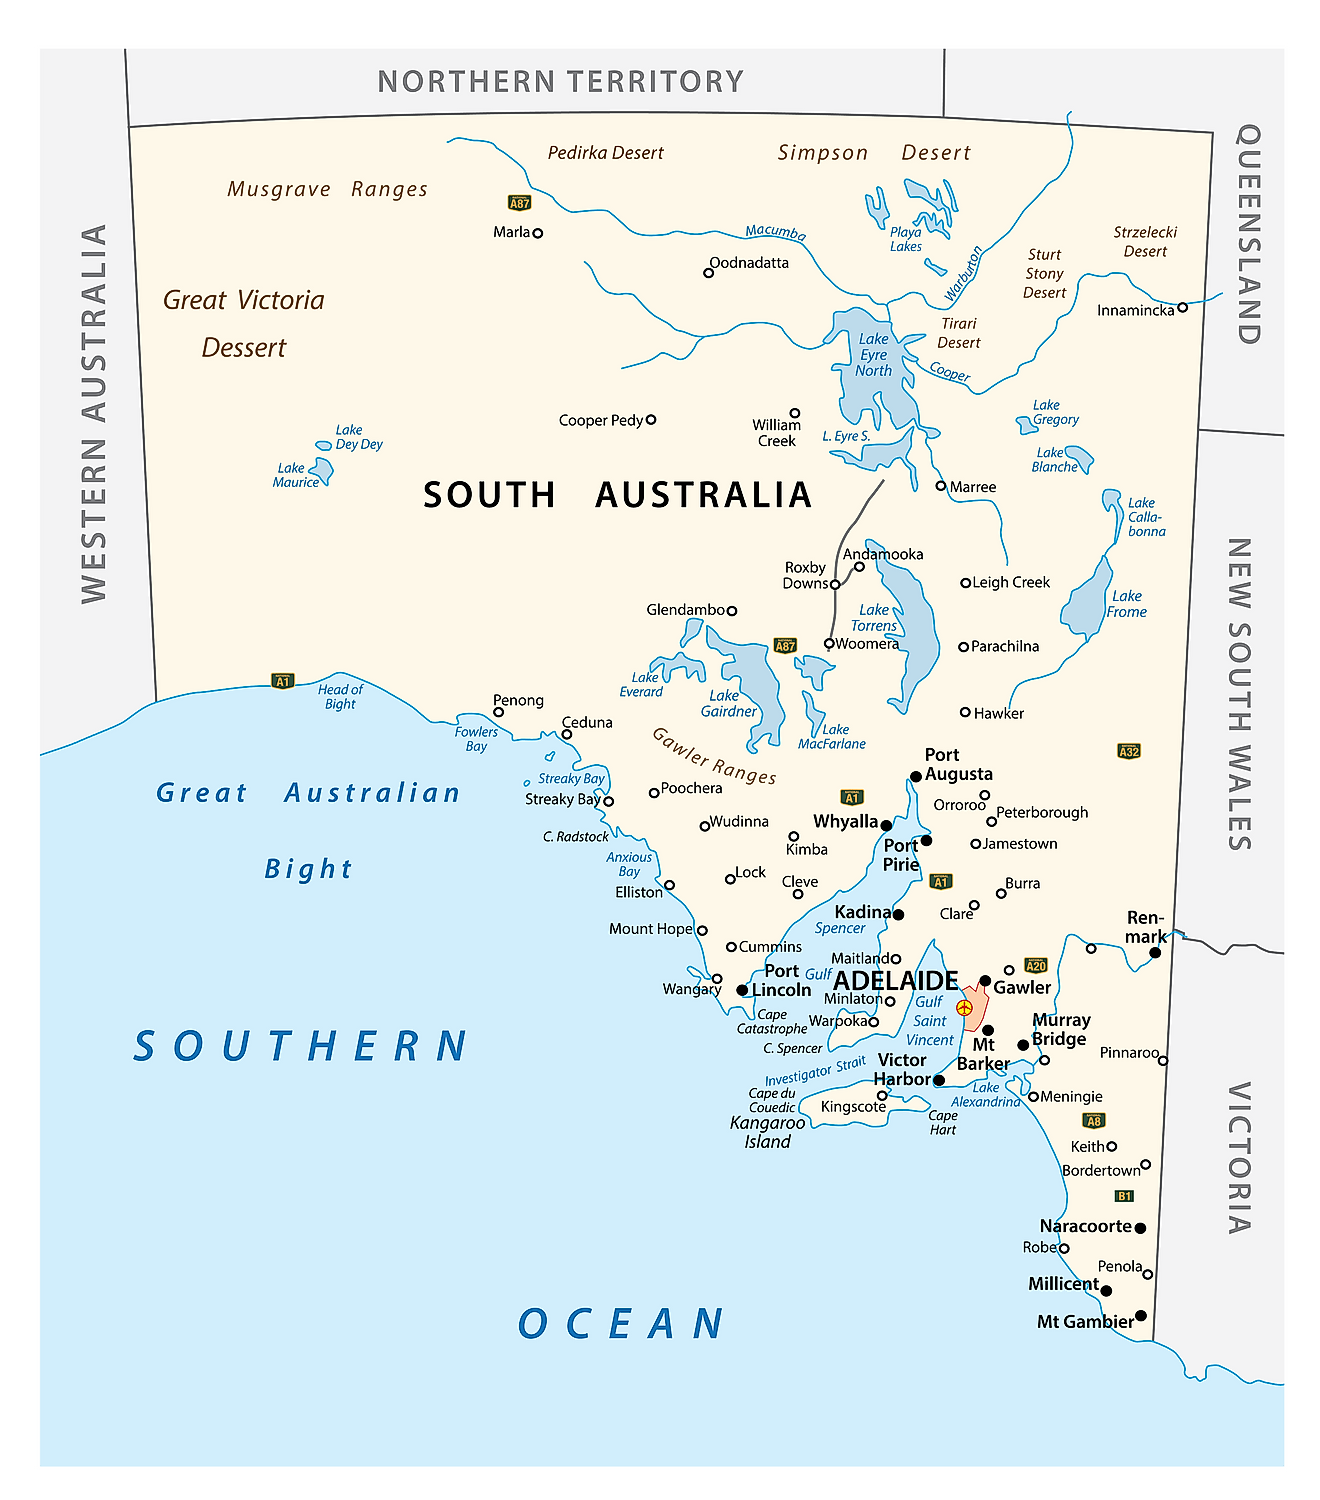 Administrative Map of South Australia showing its major cities/towns including its capital city - Adelaide